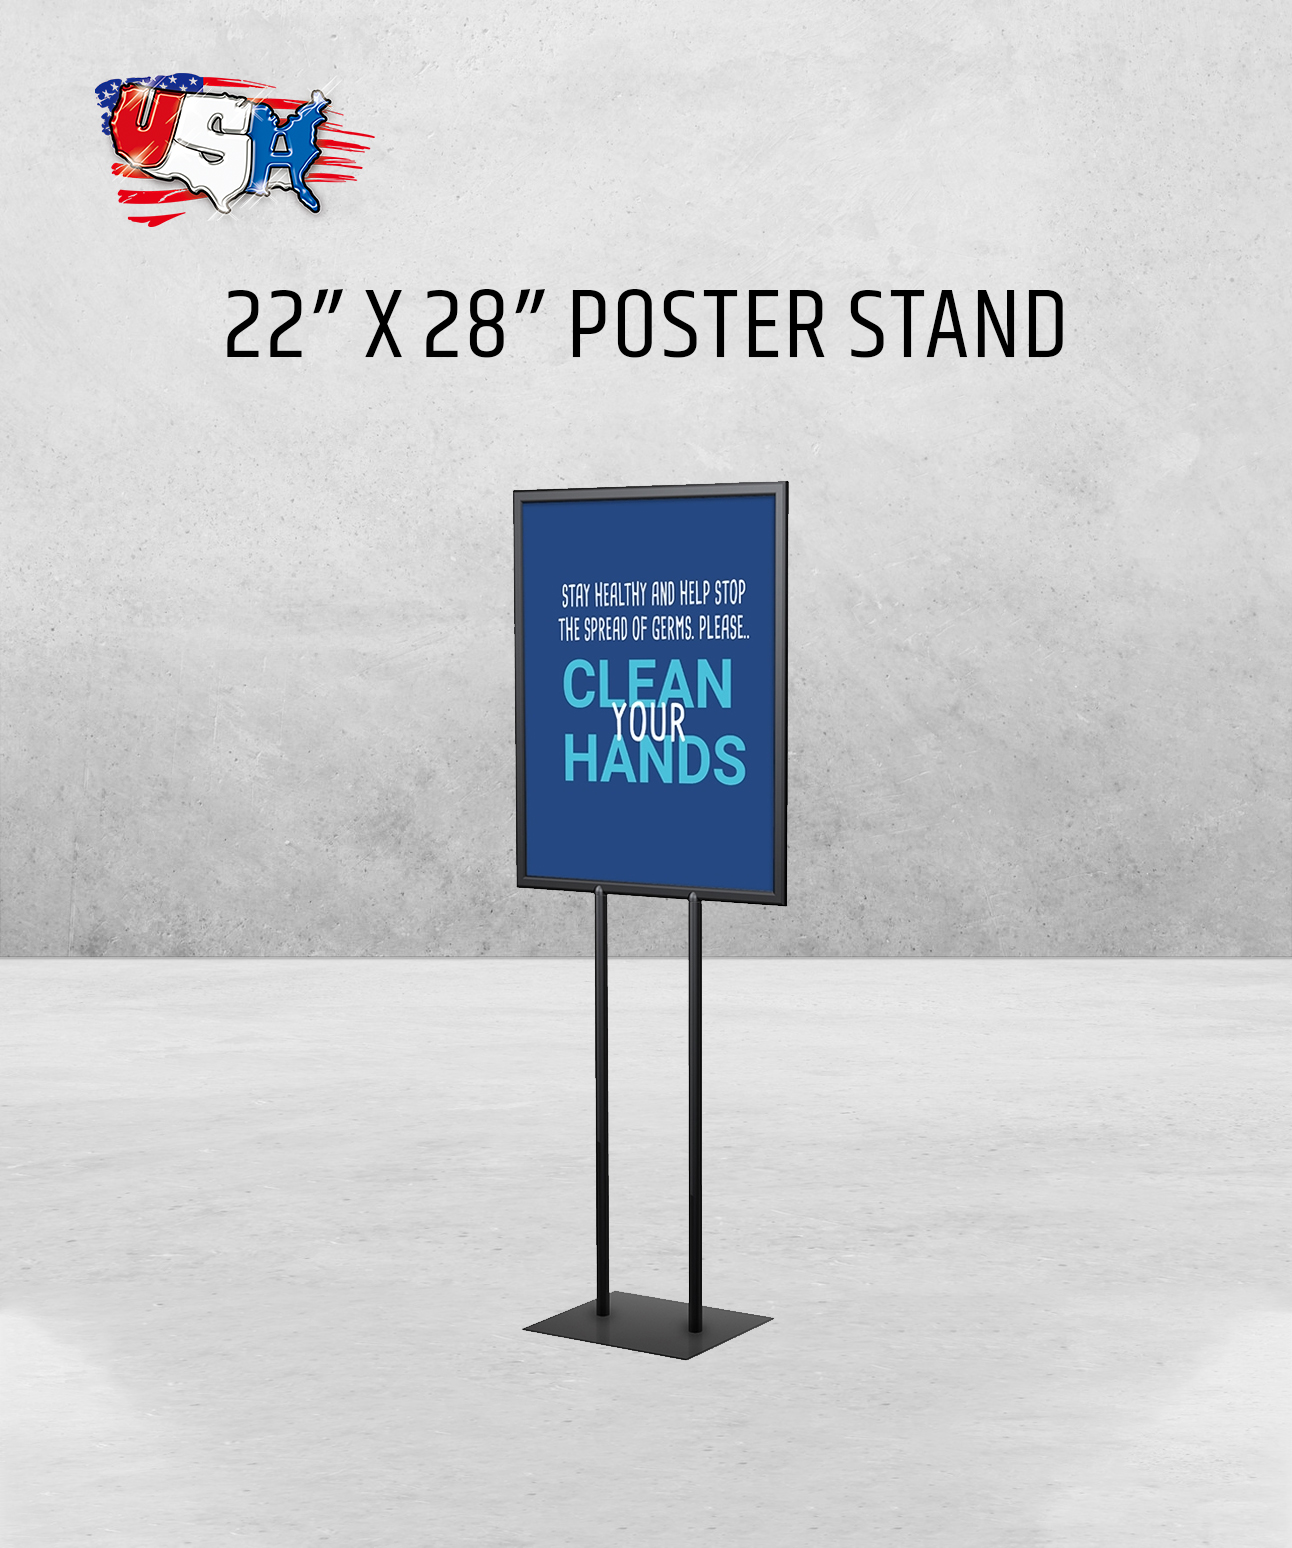 22” x 28” Poster Stand